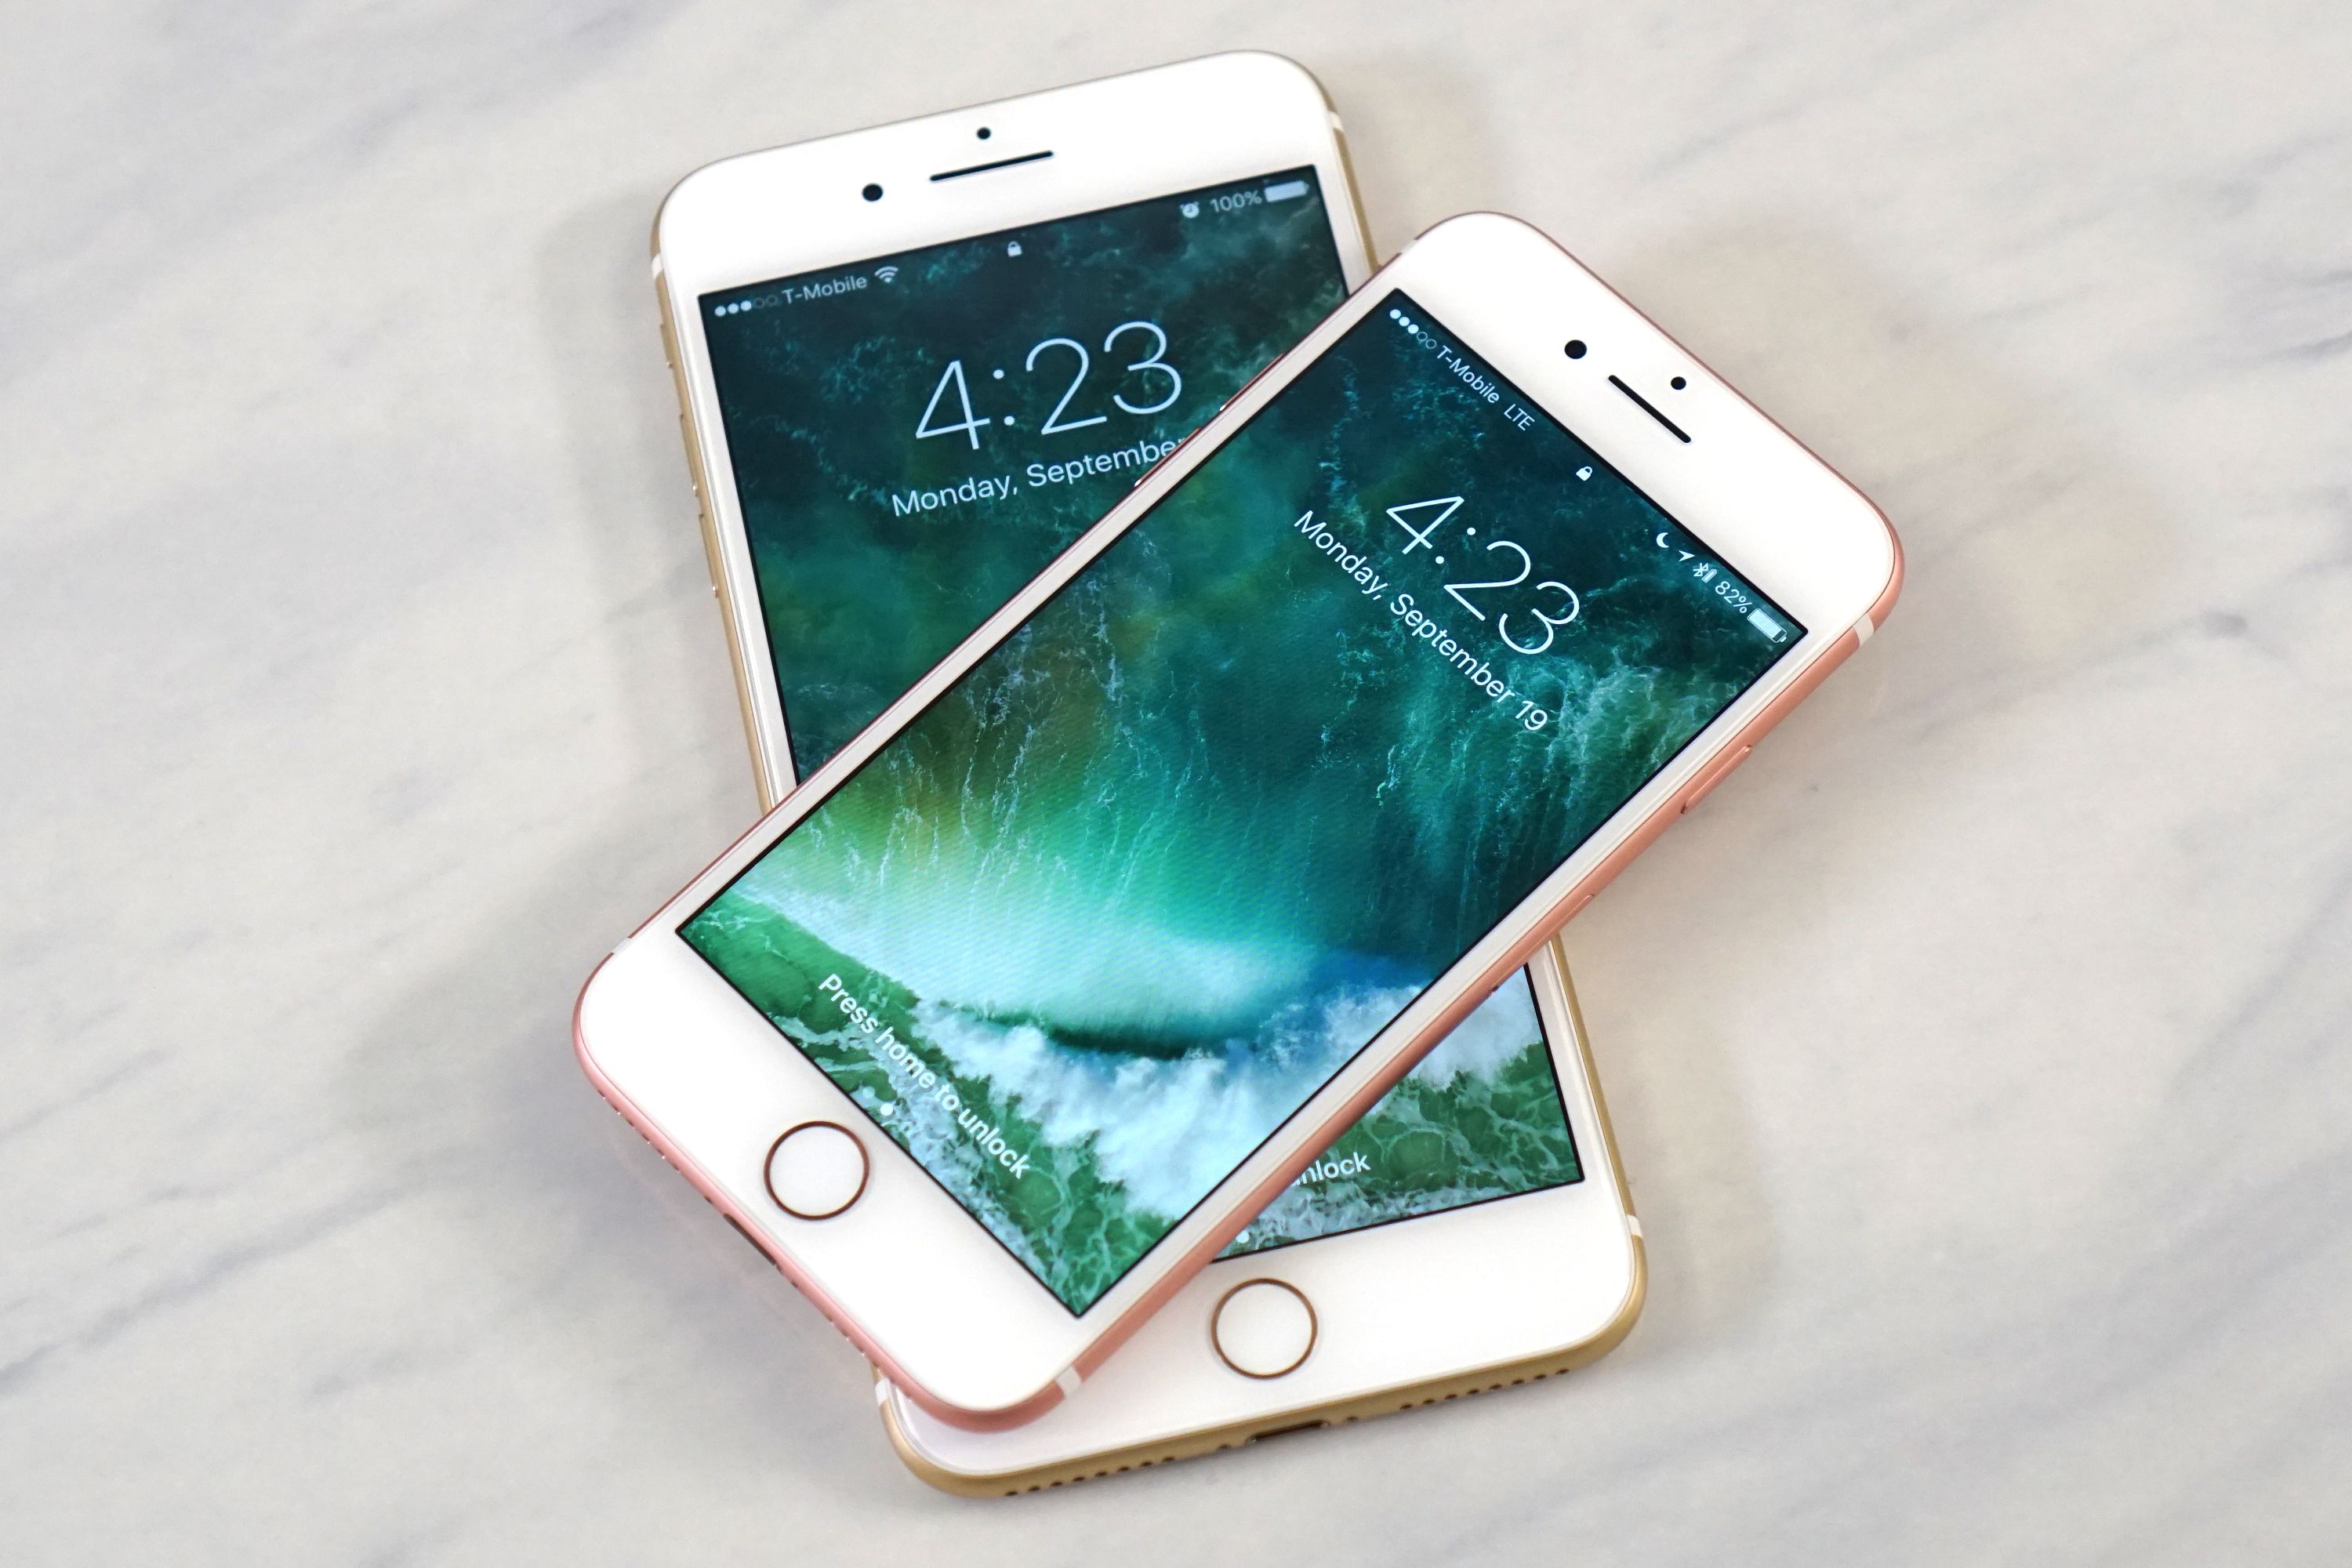 Apple iPhone 7 and iPhone 7 Plus Smartphone Reviews 2016-2017